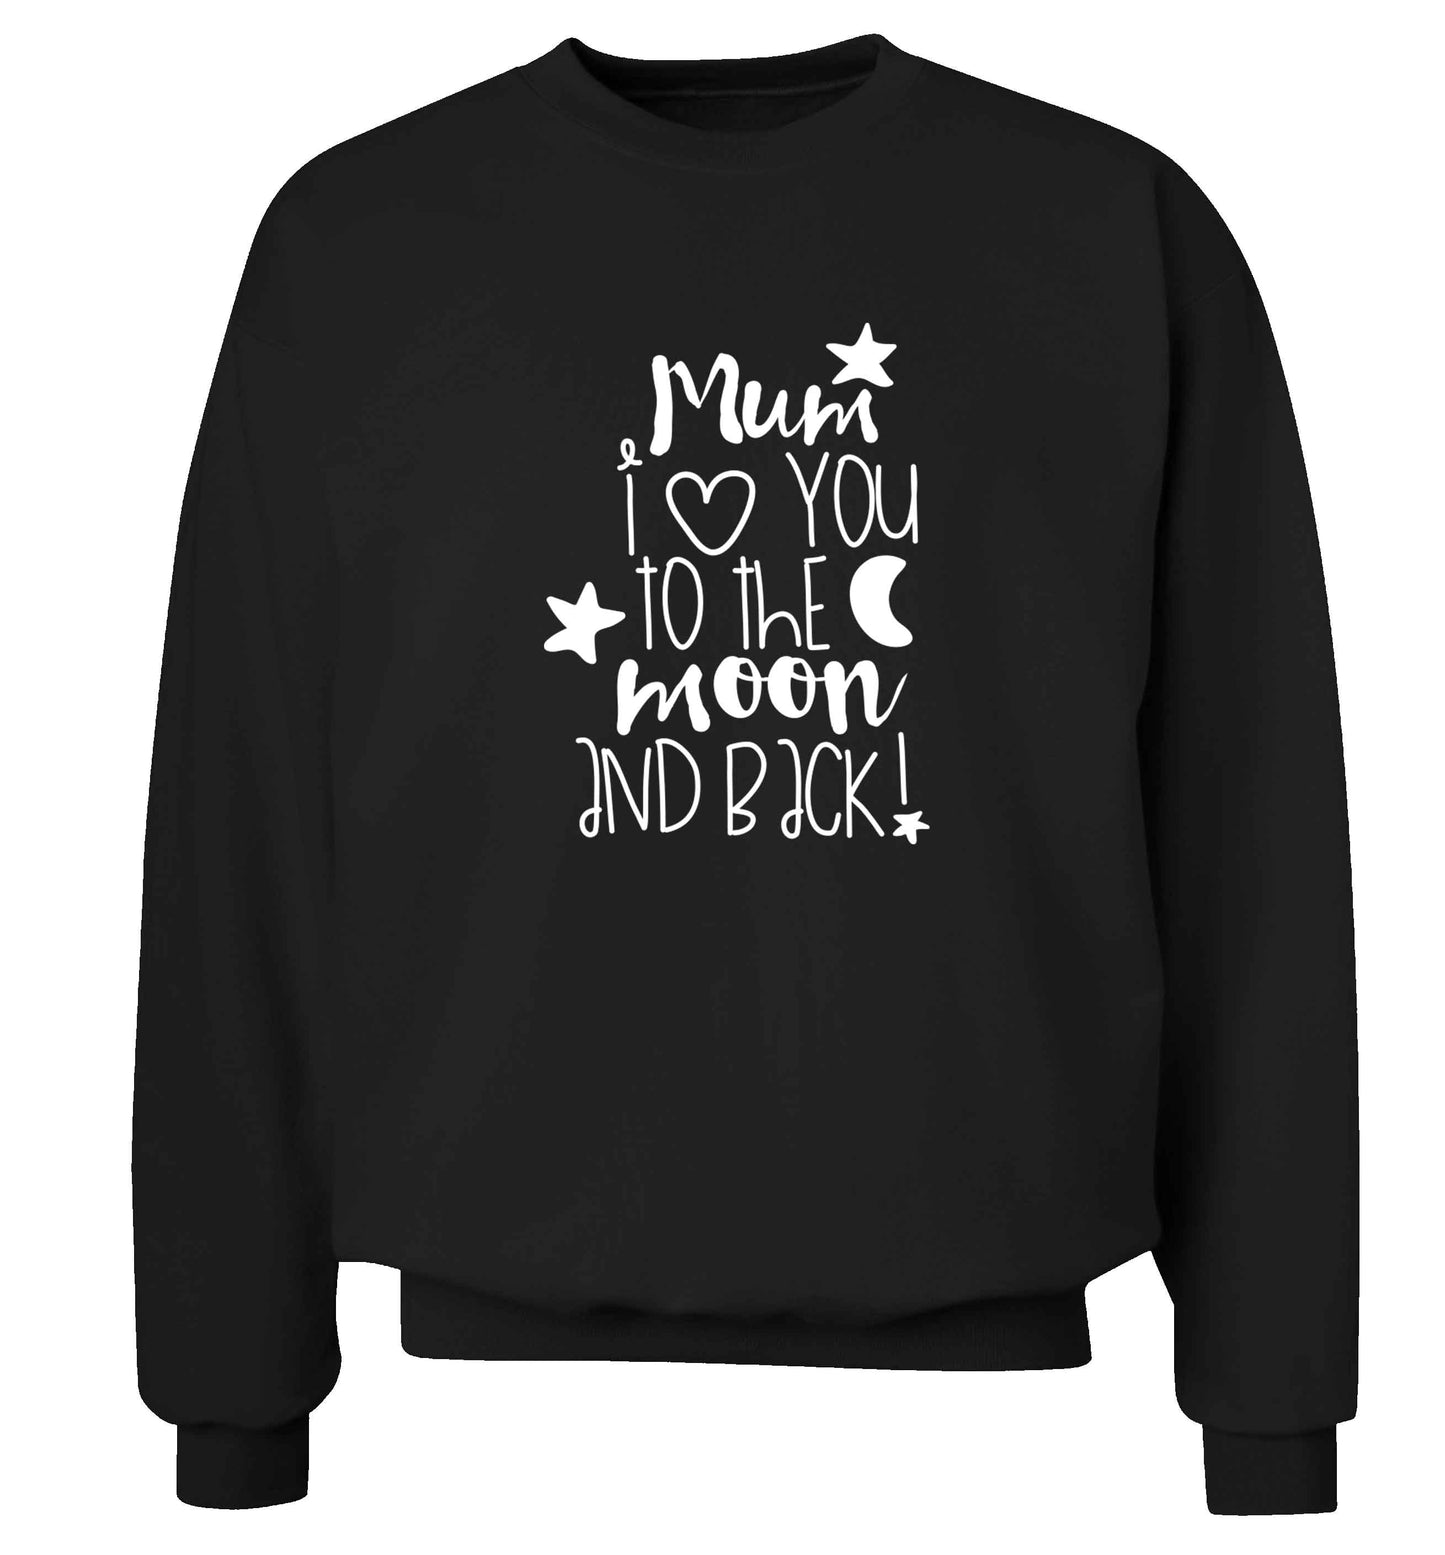 Mum I love you to the moon and back adult's unisex black sweater 2XL